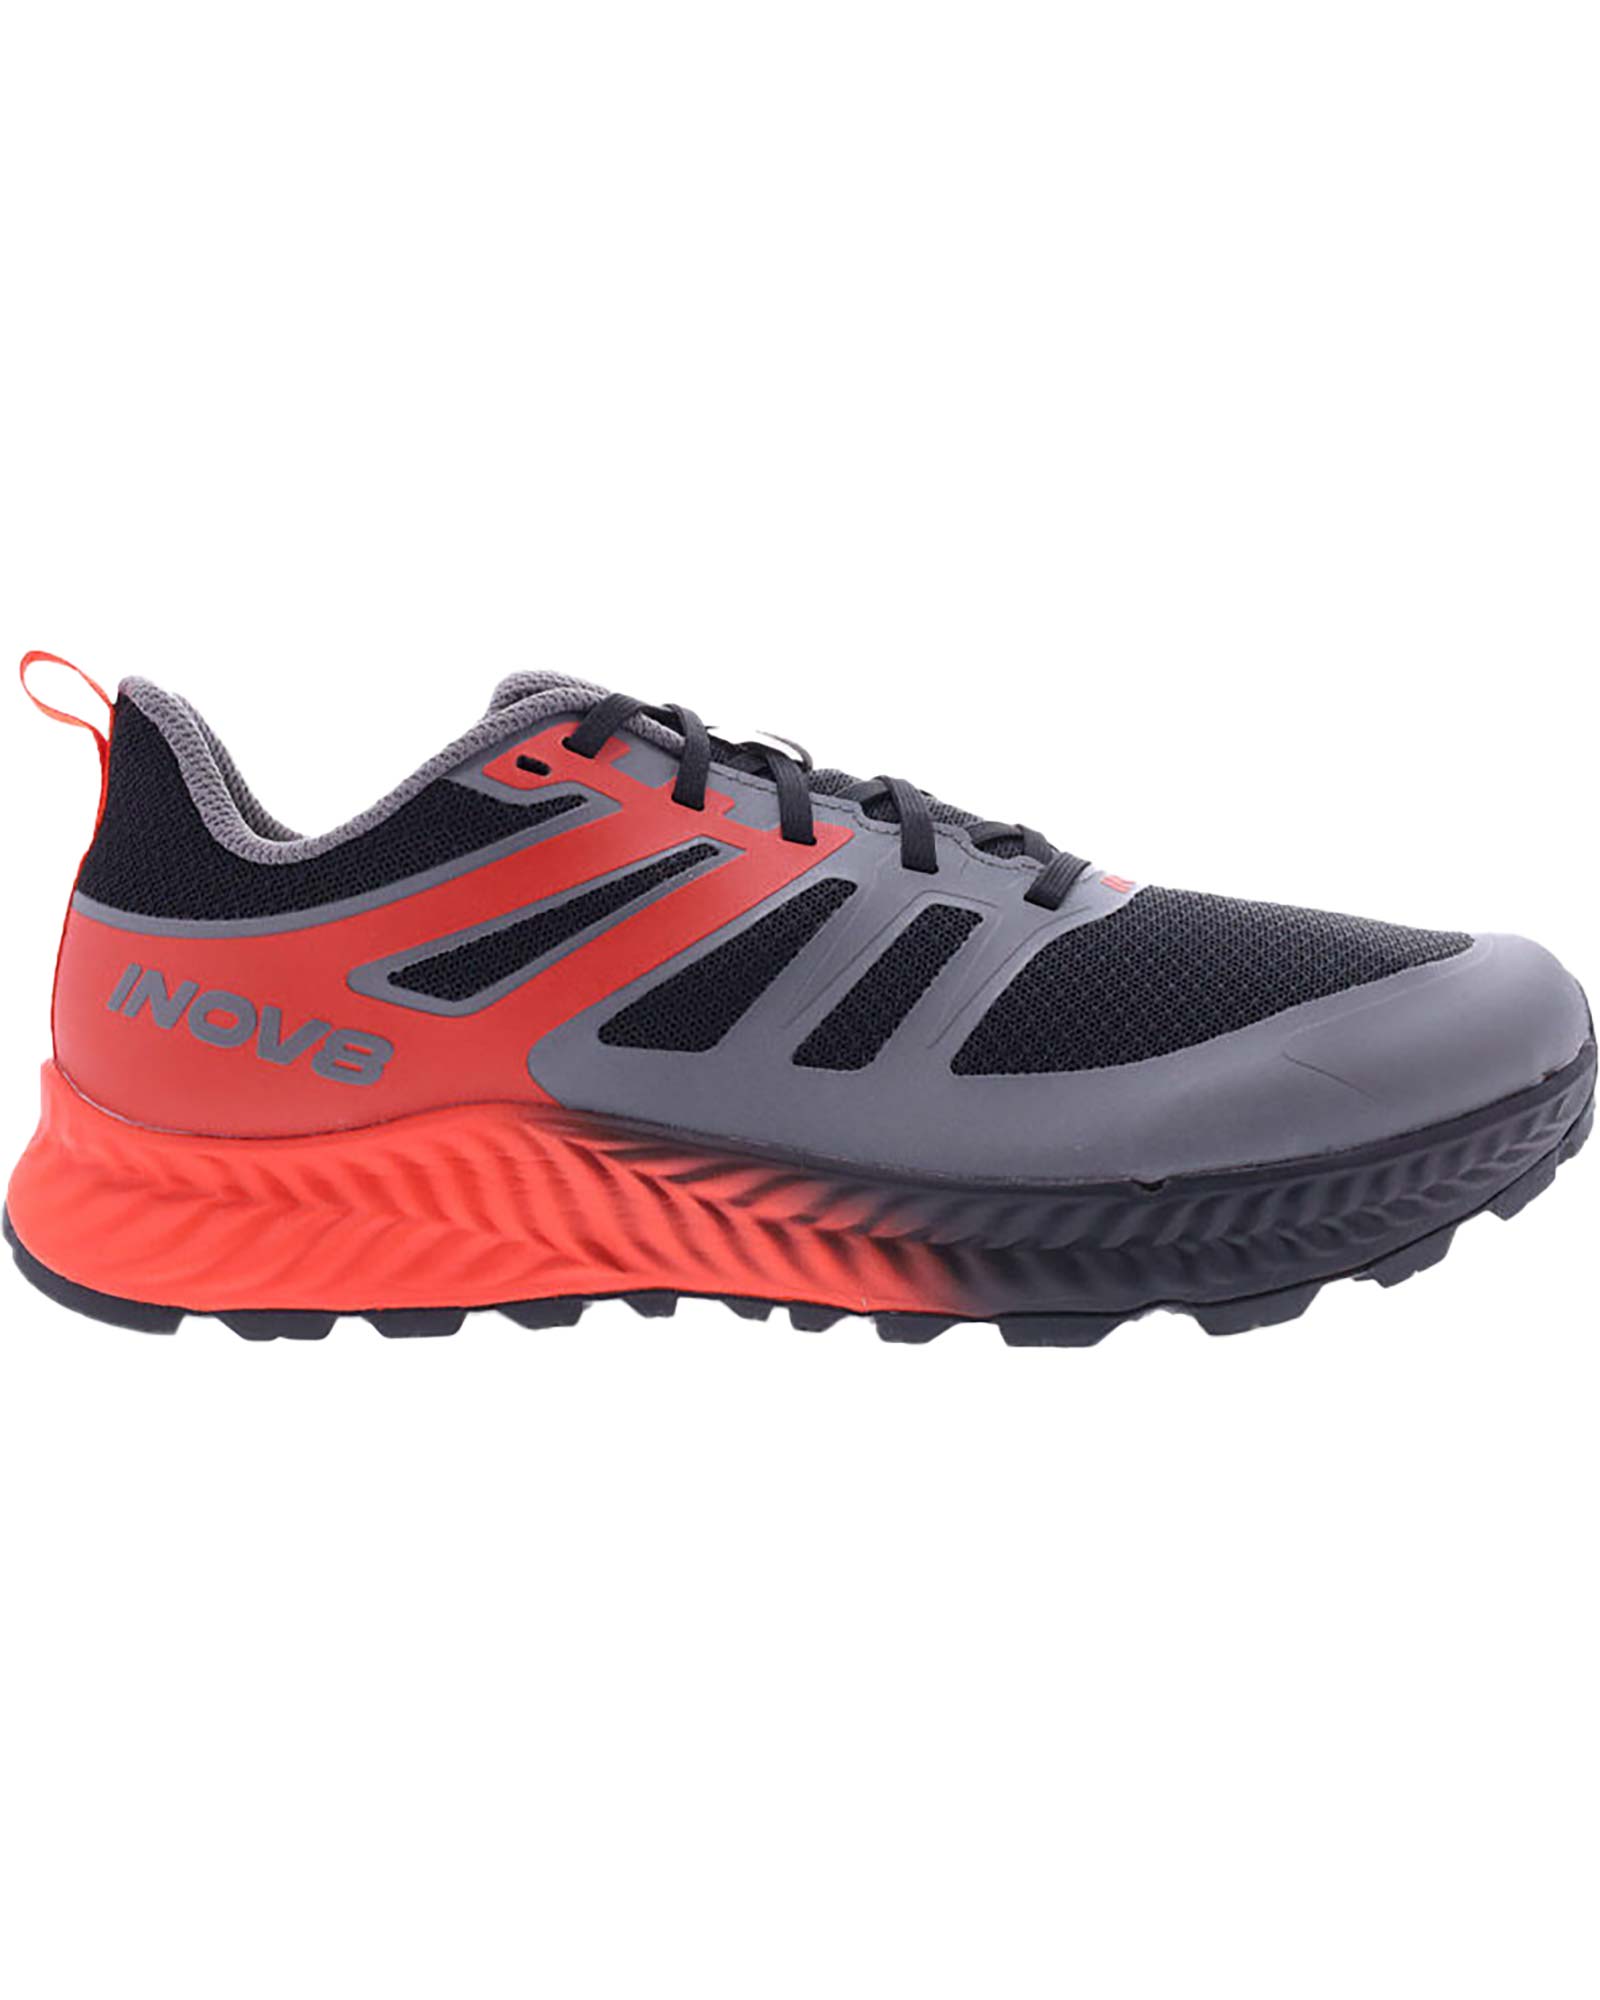 INOV8 Men's TrailFly Wide Fit Trail Running Shoes